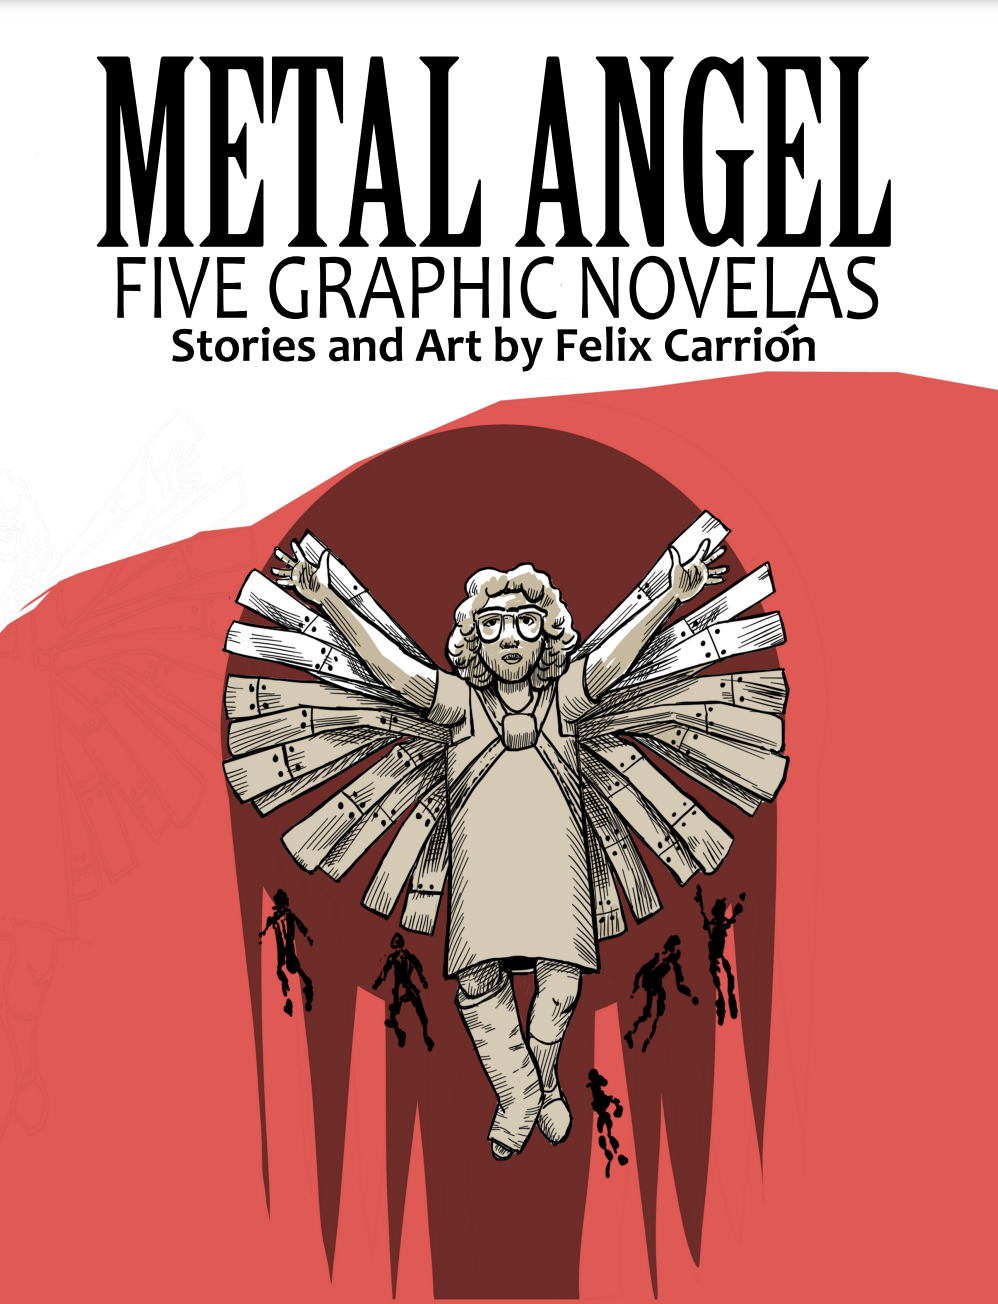 Metal Angel: Five Graphic Novellas by Felix Carrion